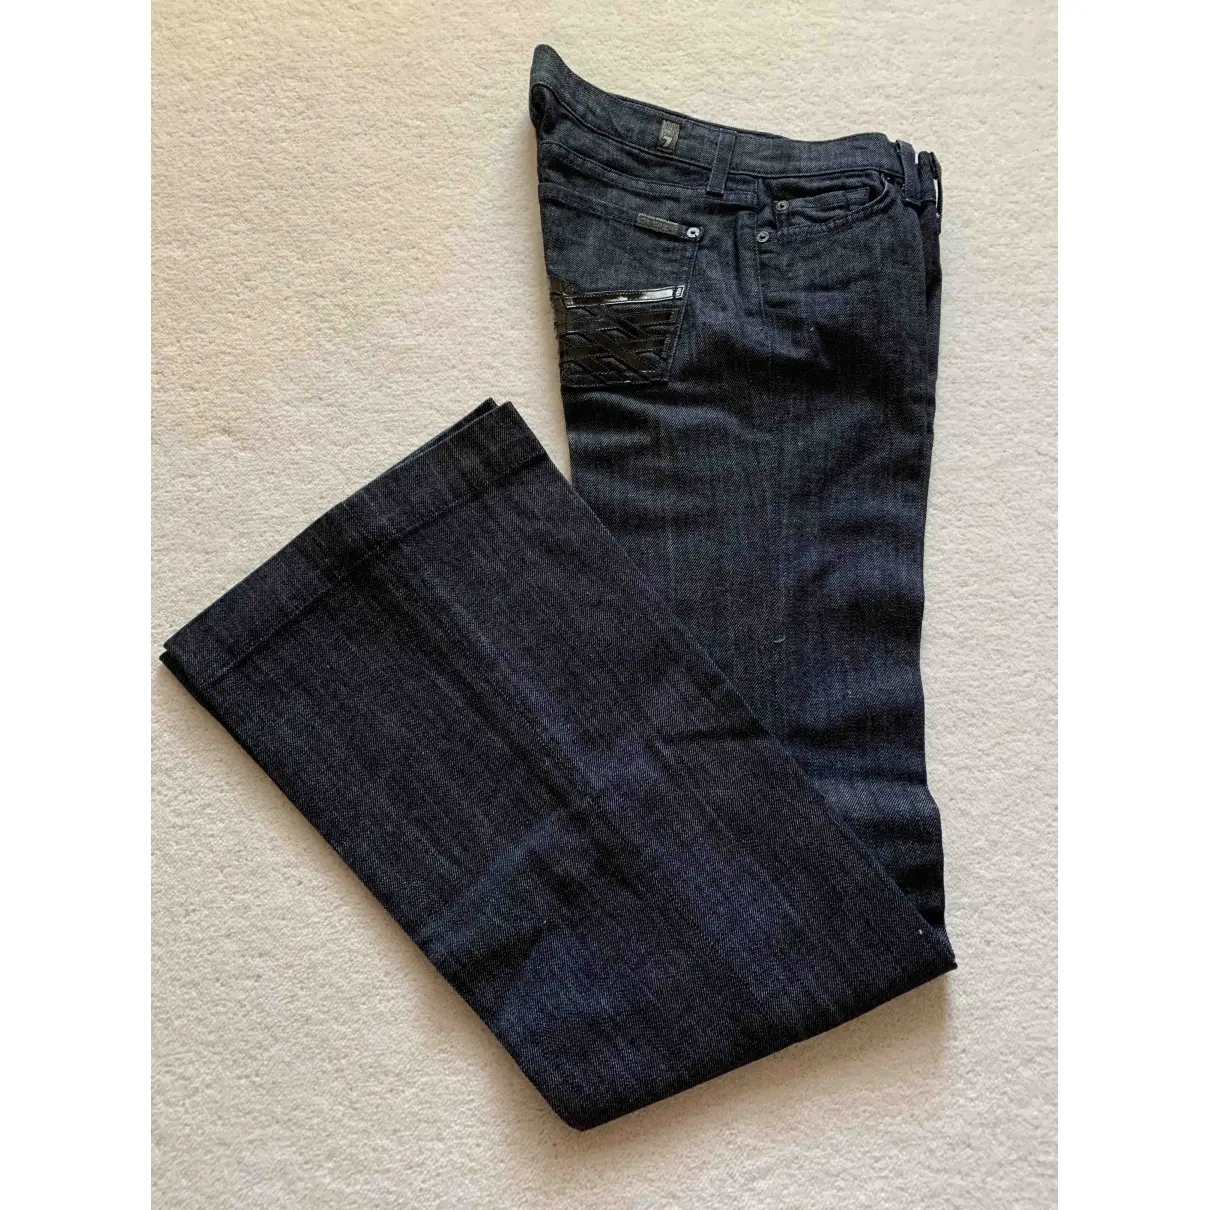 Navy Cotton - elasthane Jeans 7 For All Mankind